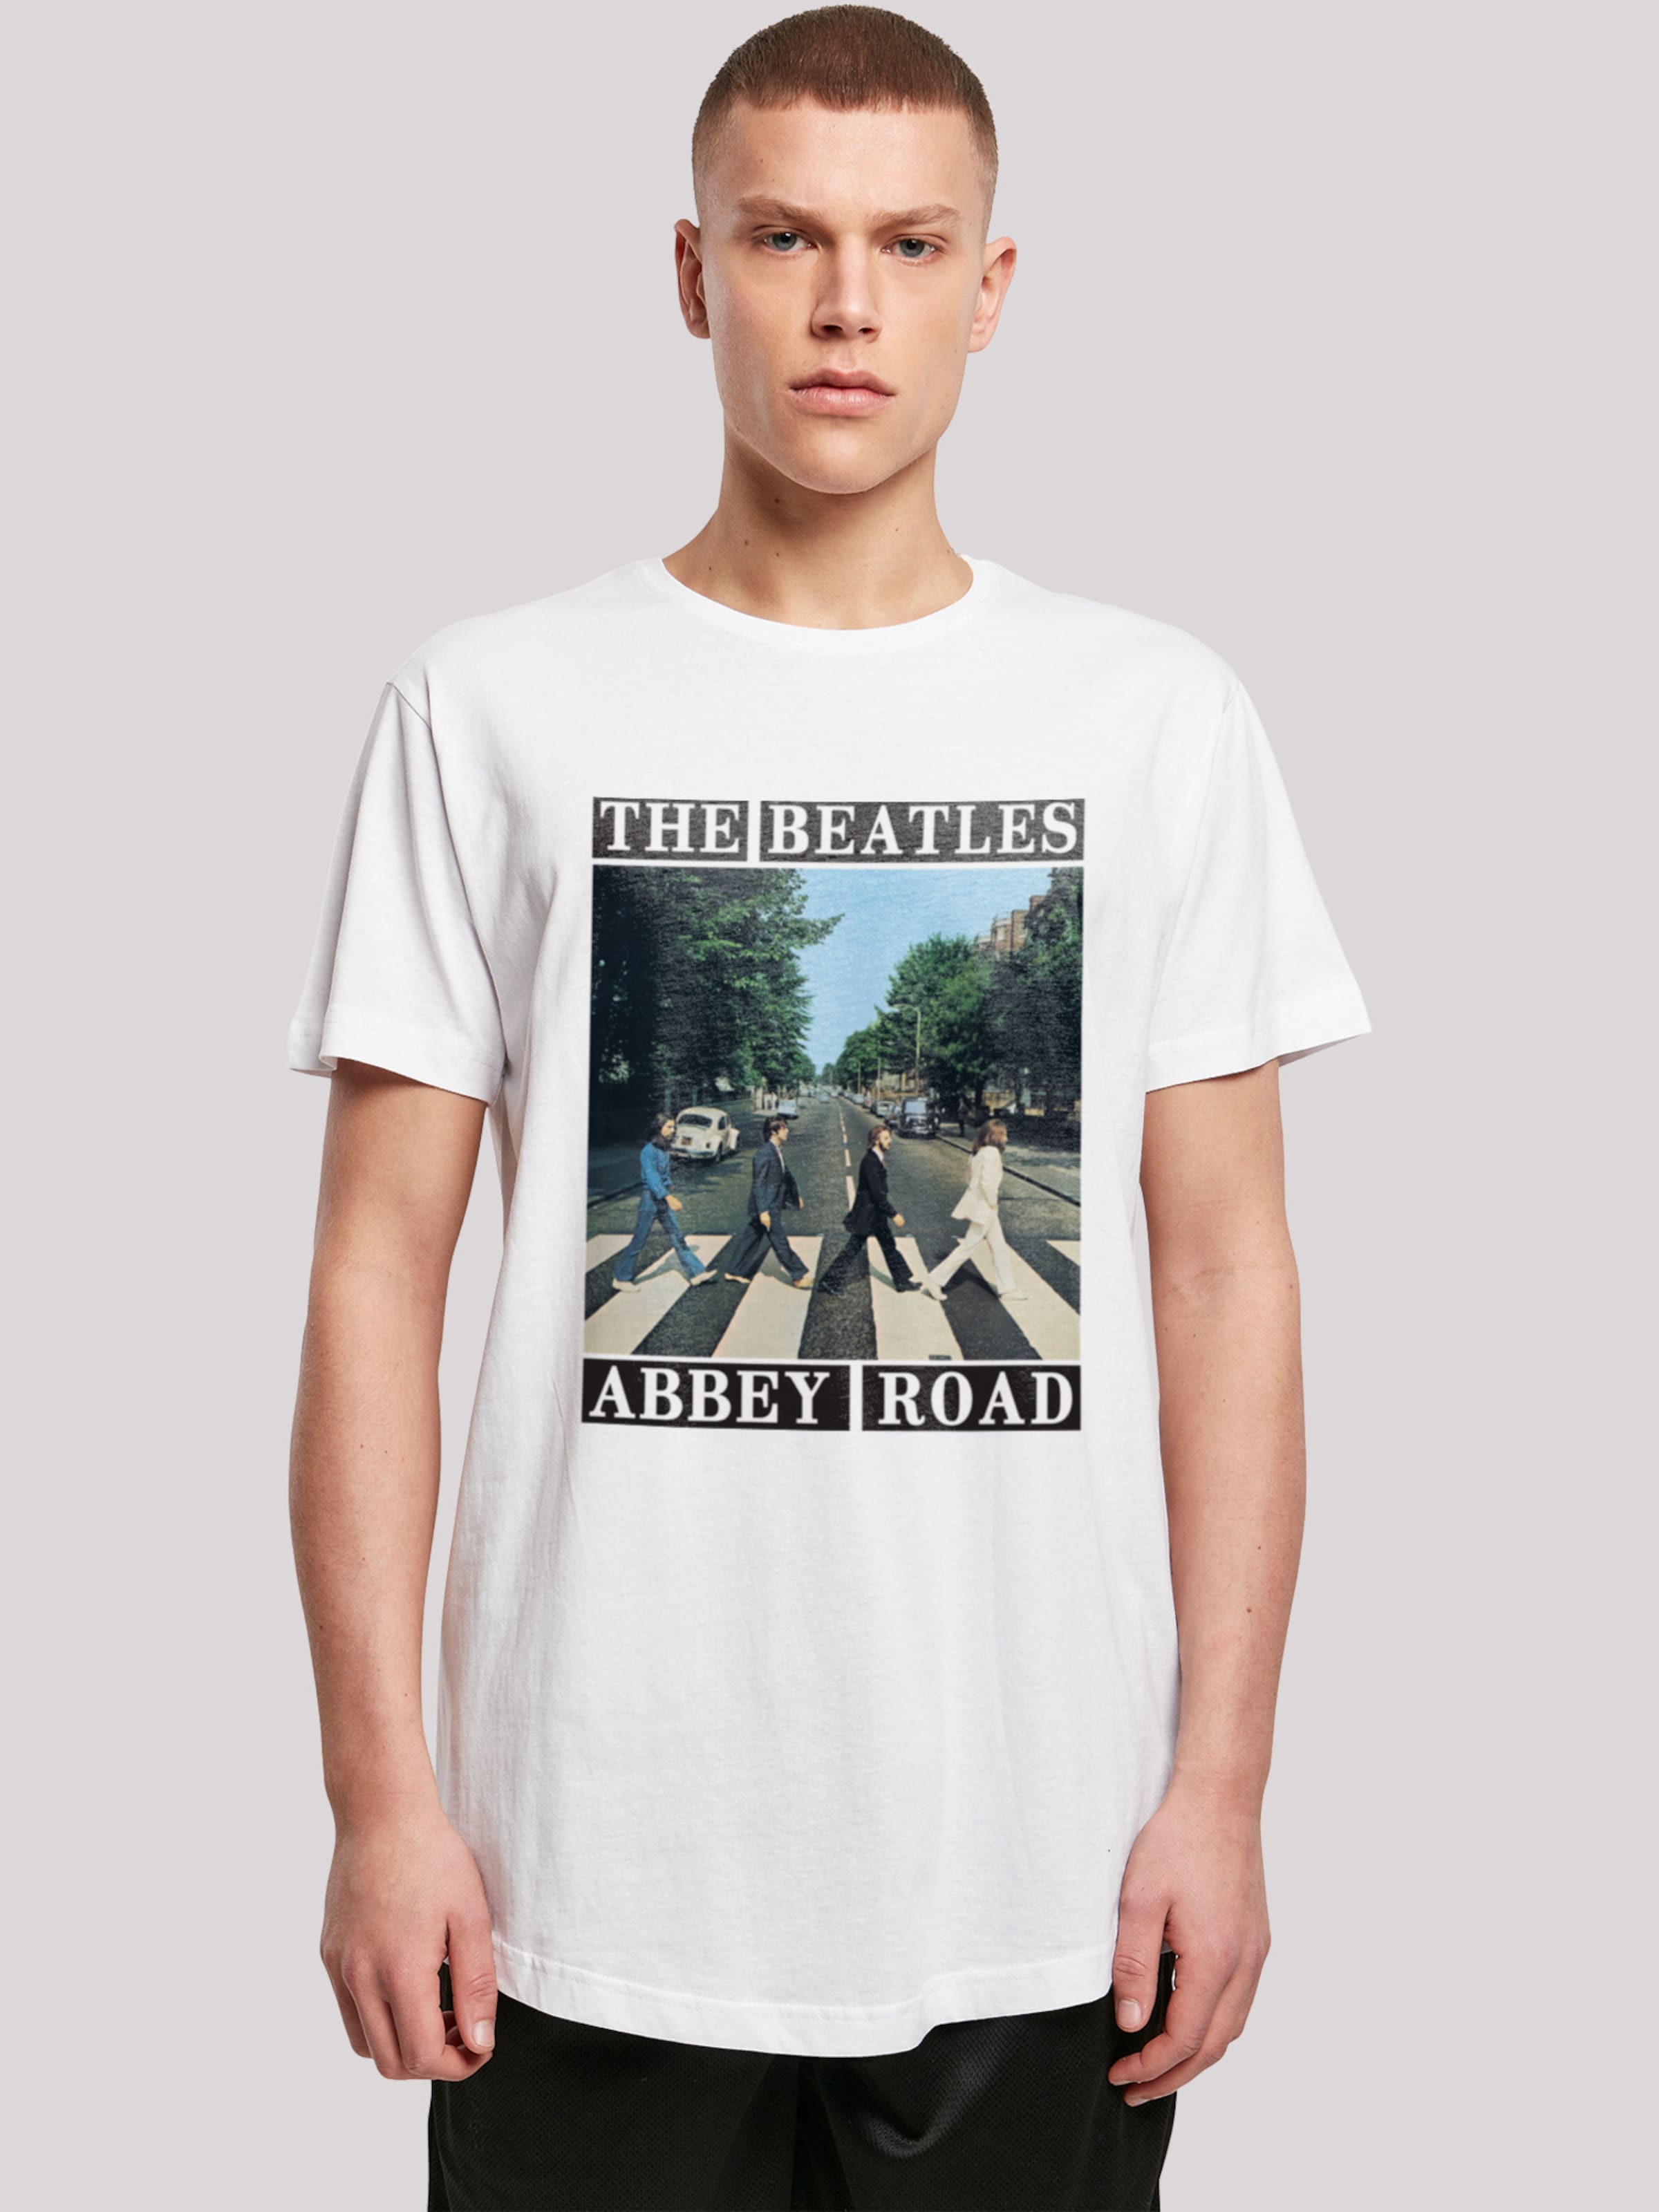 Band ABOUT | Abbey \'The Beatles White F4NT4STIC YOU Shirt in Road\'